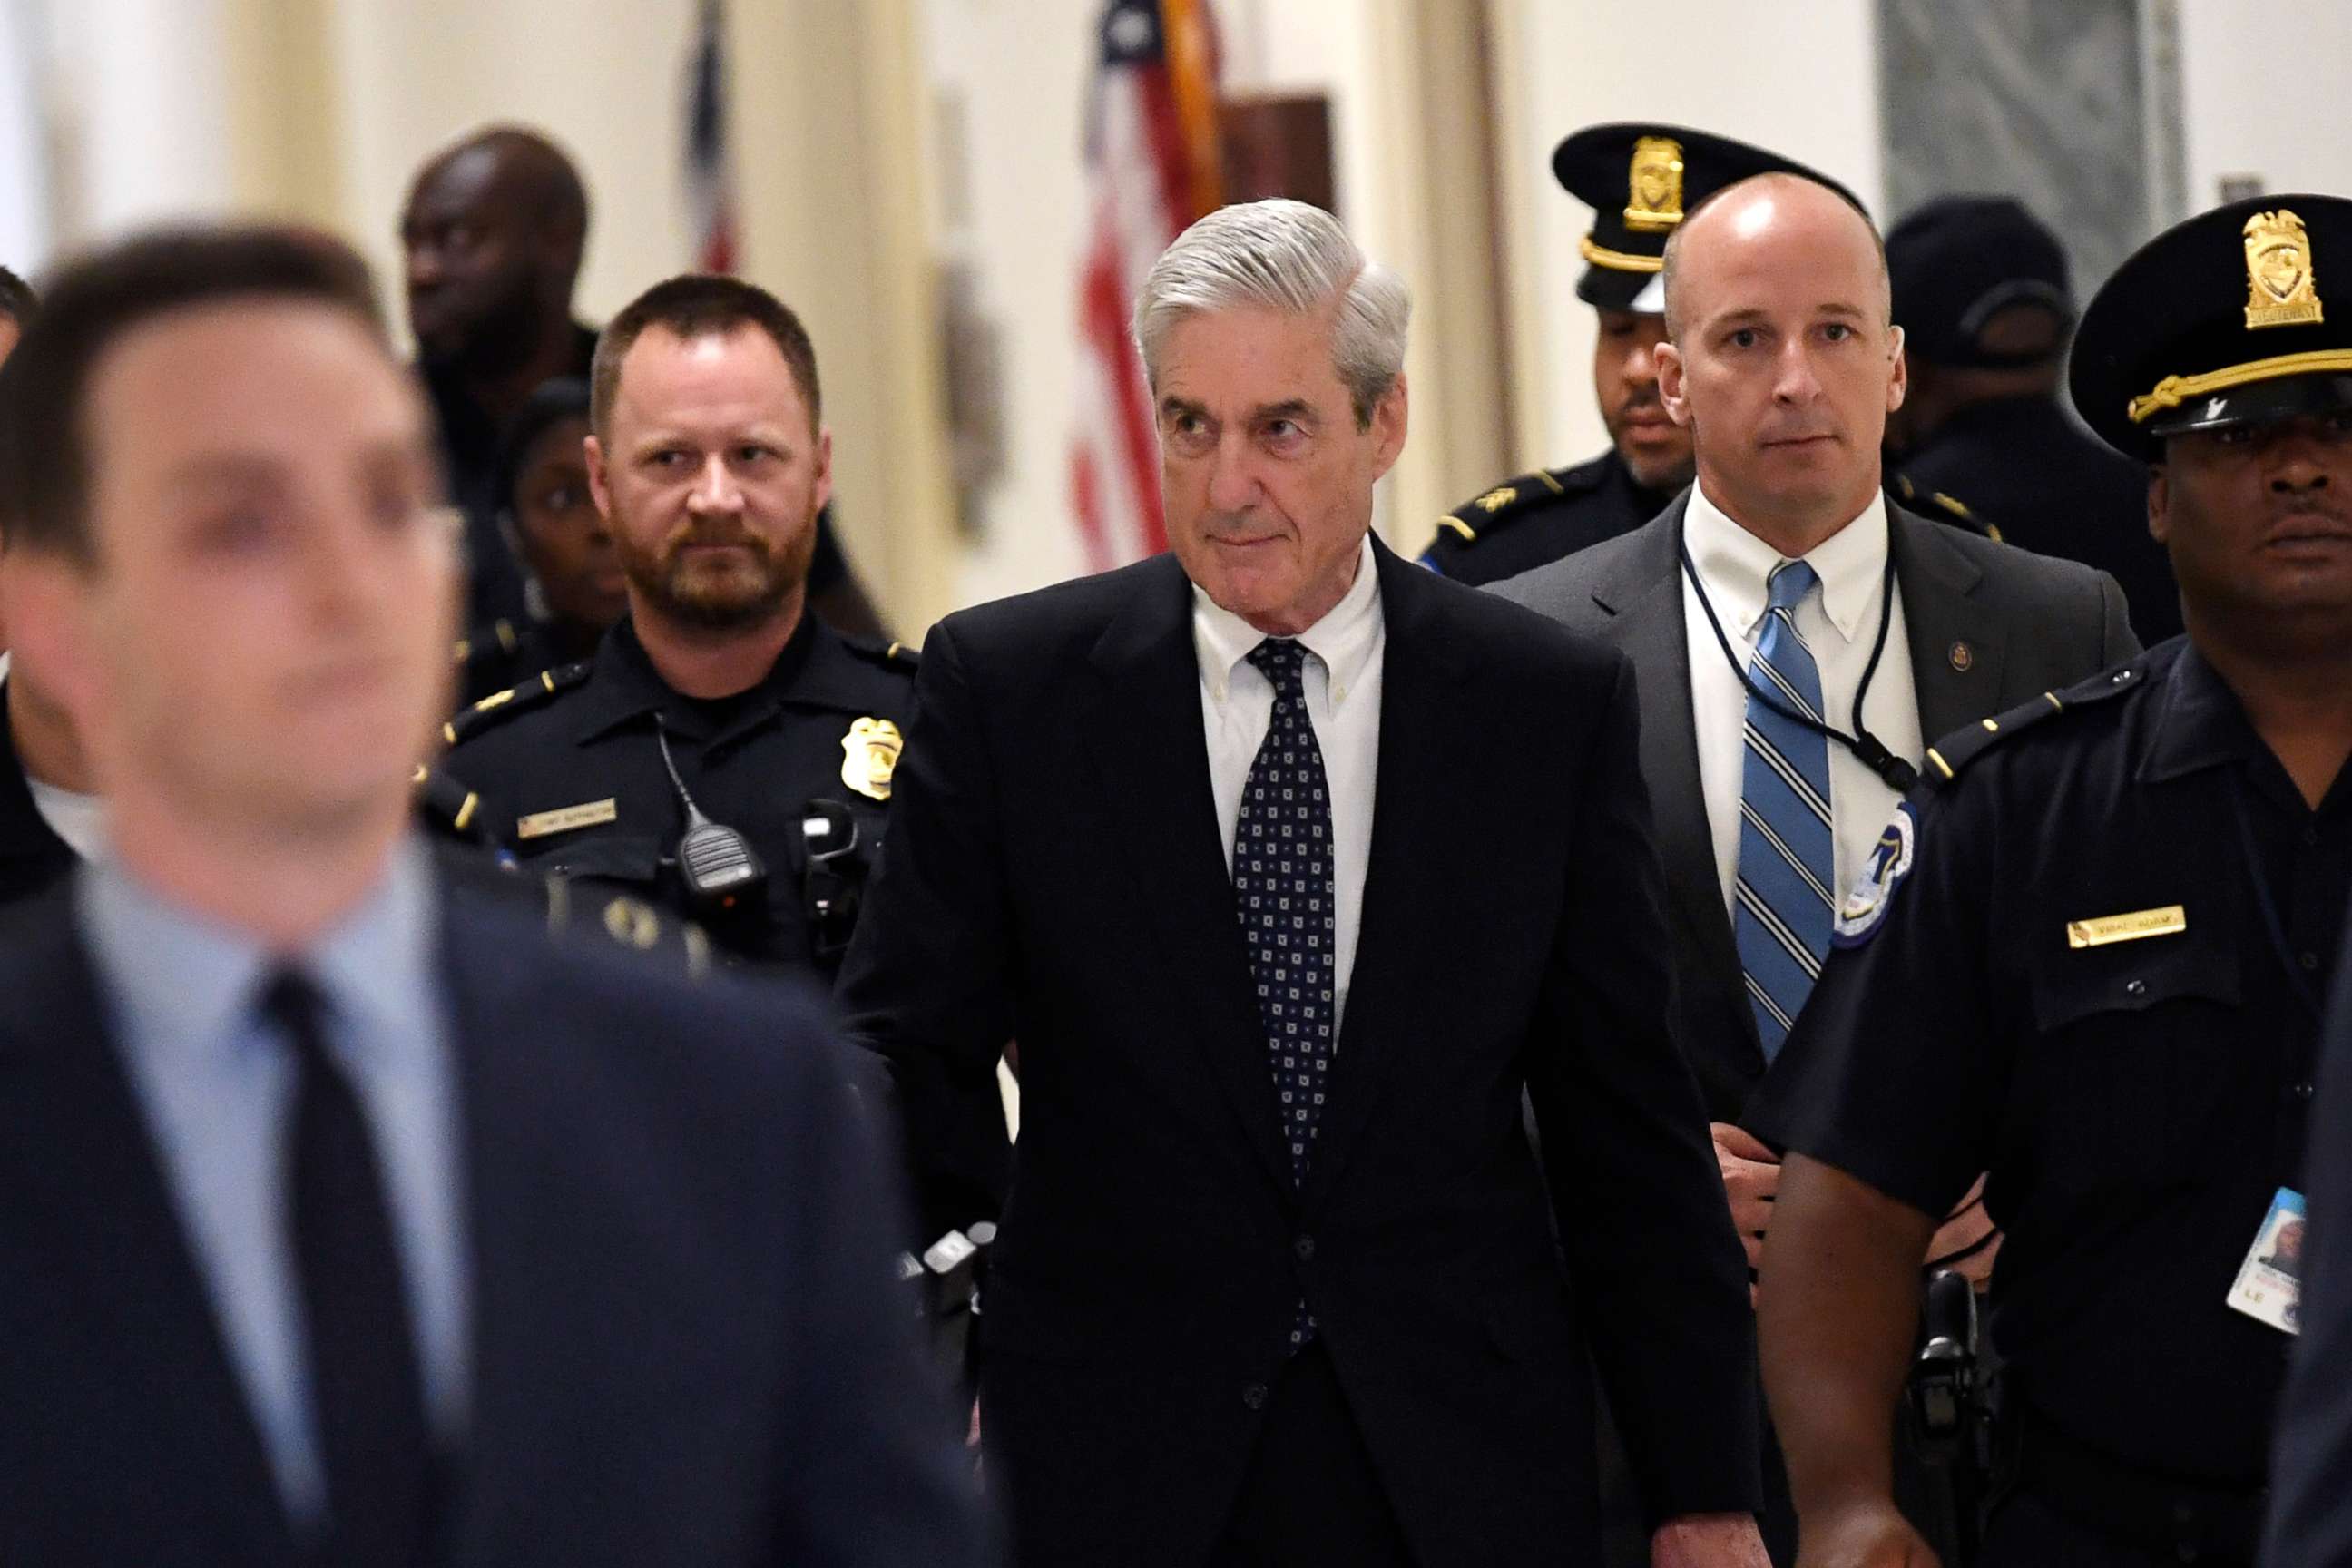 PHOTO: Former special counsel Robert Mueller arrives to testify on Capitol Hill in Washington, July 24, 2019, before the House Judiciary Committee hearing on his report on Russian election interference.